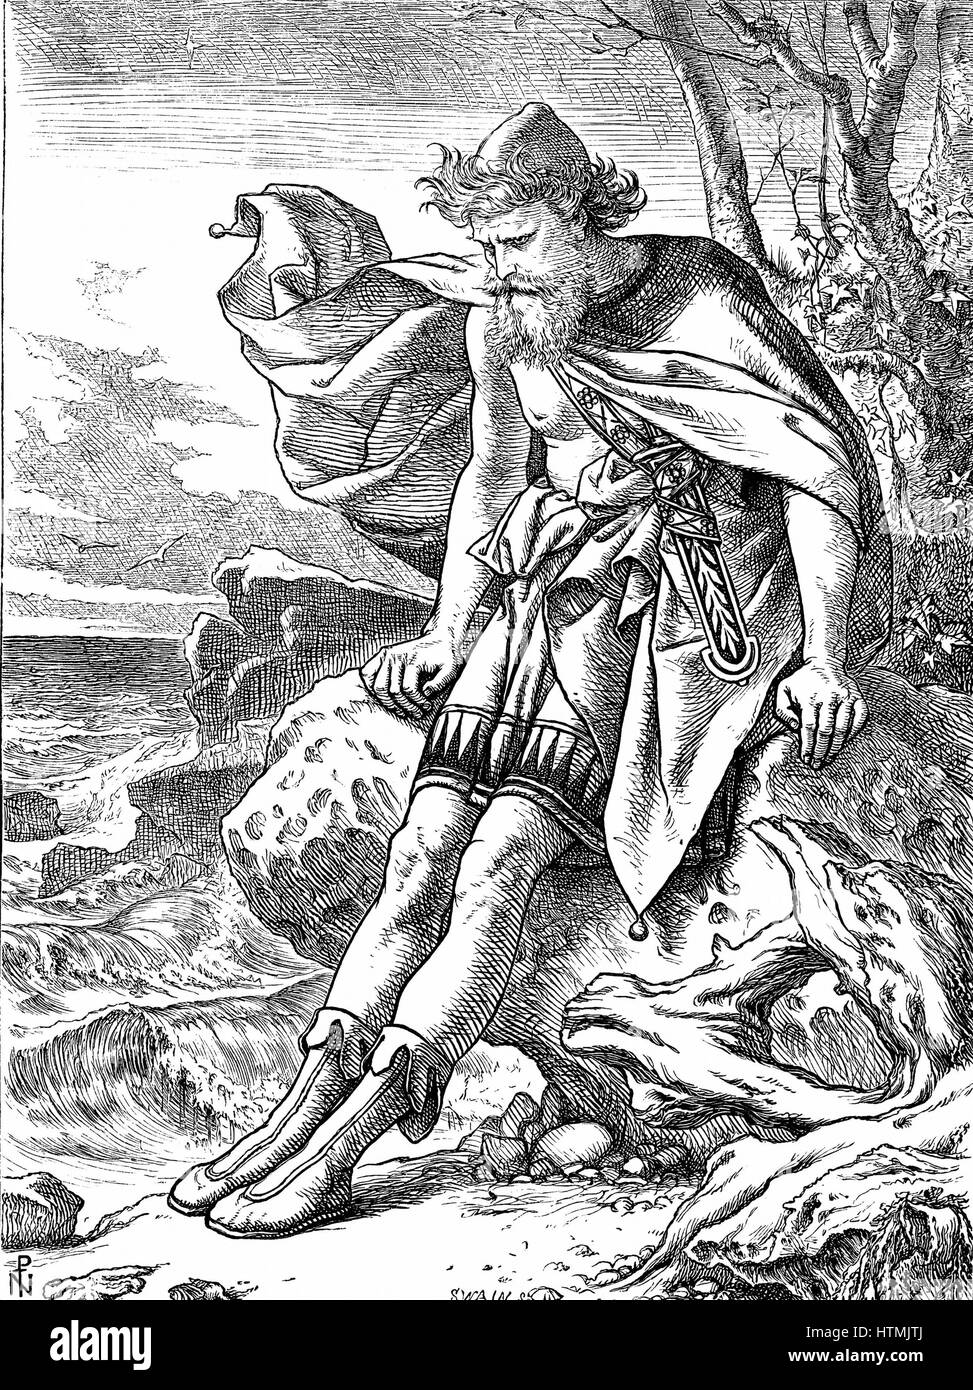 'Ulysses on Ogygia'. Ulysses, mythical king of Ithaca, hero of Homer's 'Odyssey' (Odysseus). Illustration by Joseph Noel Paton (1821-1901) for his own poem published London 1864. Paton was the original illustrator of Charles Kingsley 'The Water Babies' Stock Photo